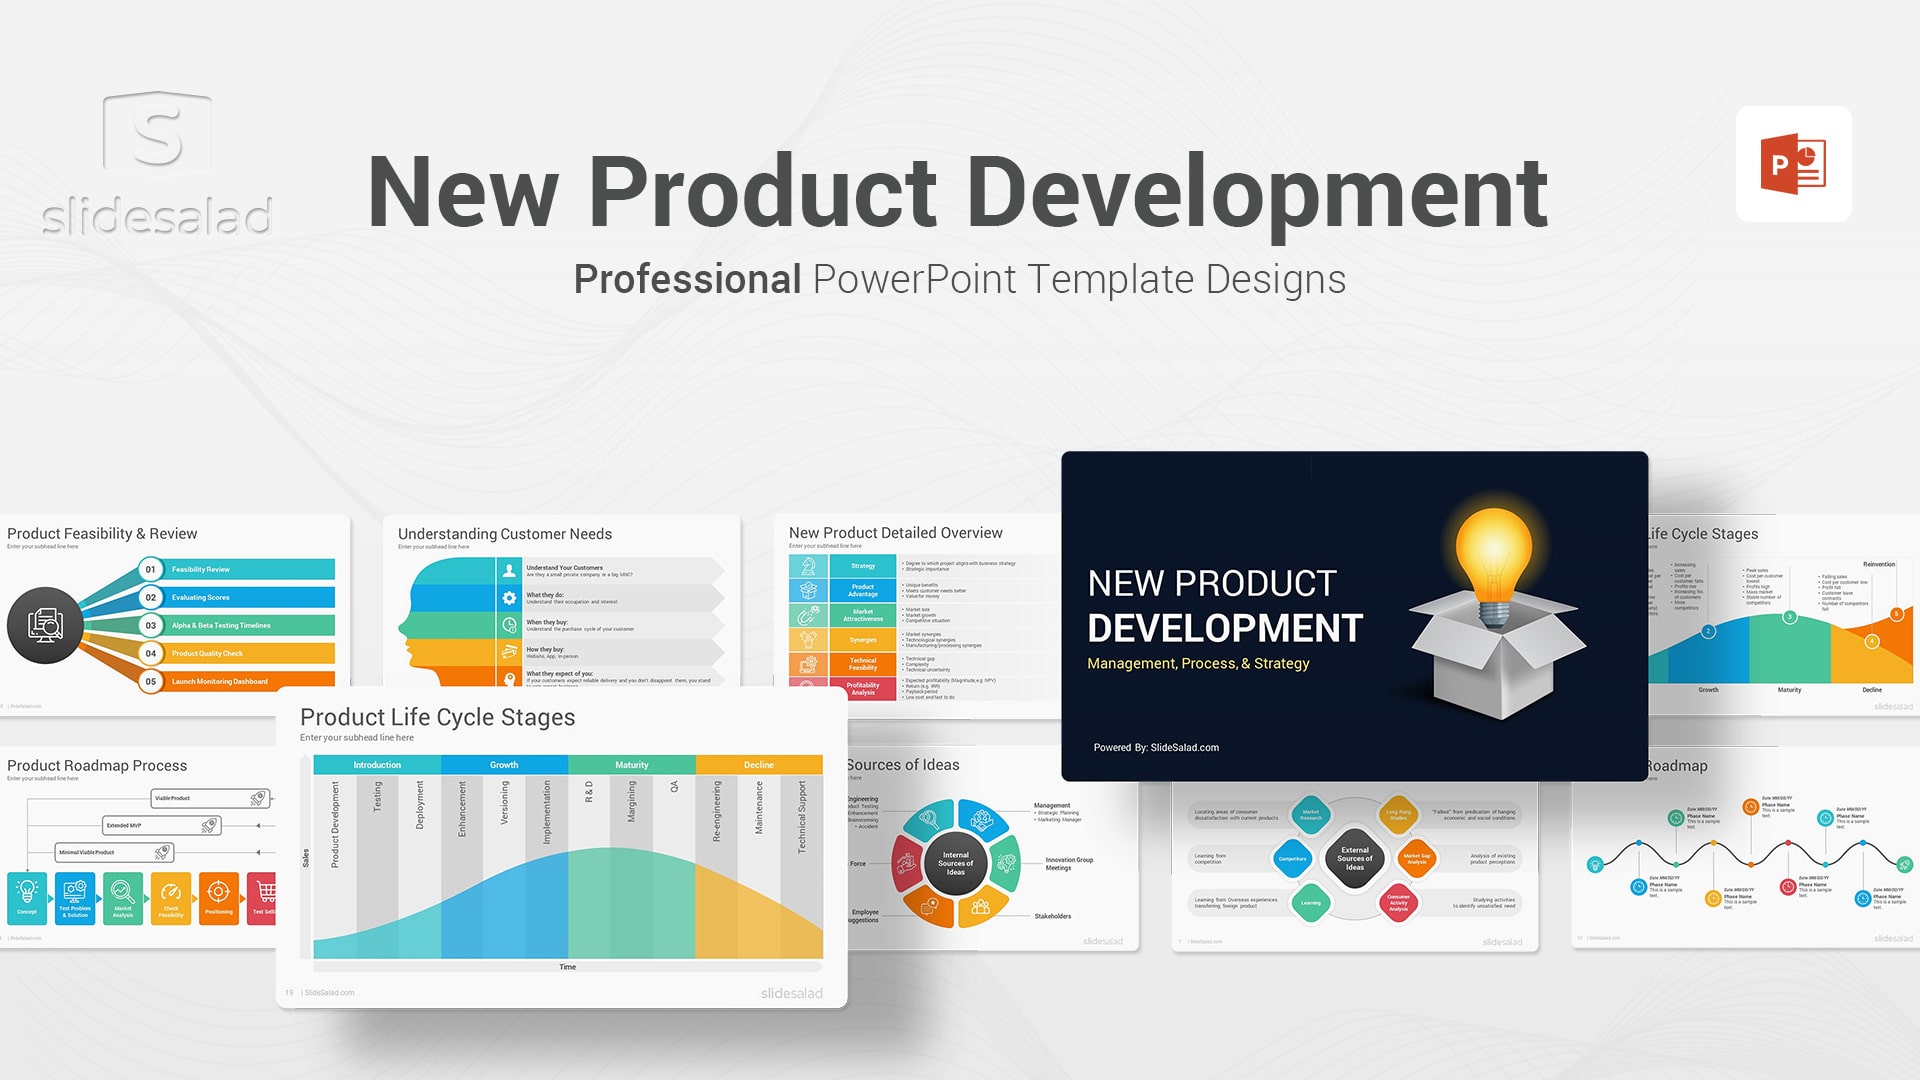 New Product Development PowerPoint Template - Stunning PPT Template Designs for Product Launch